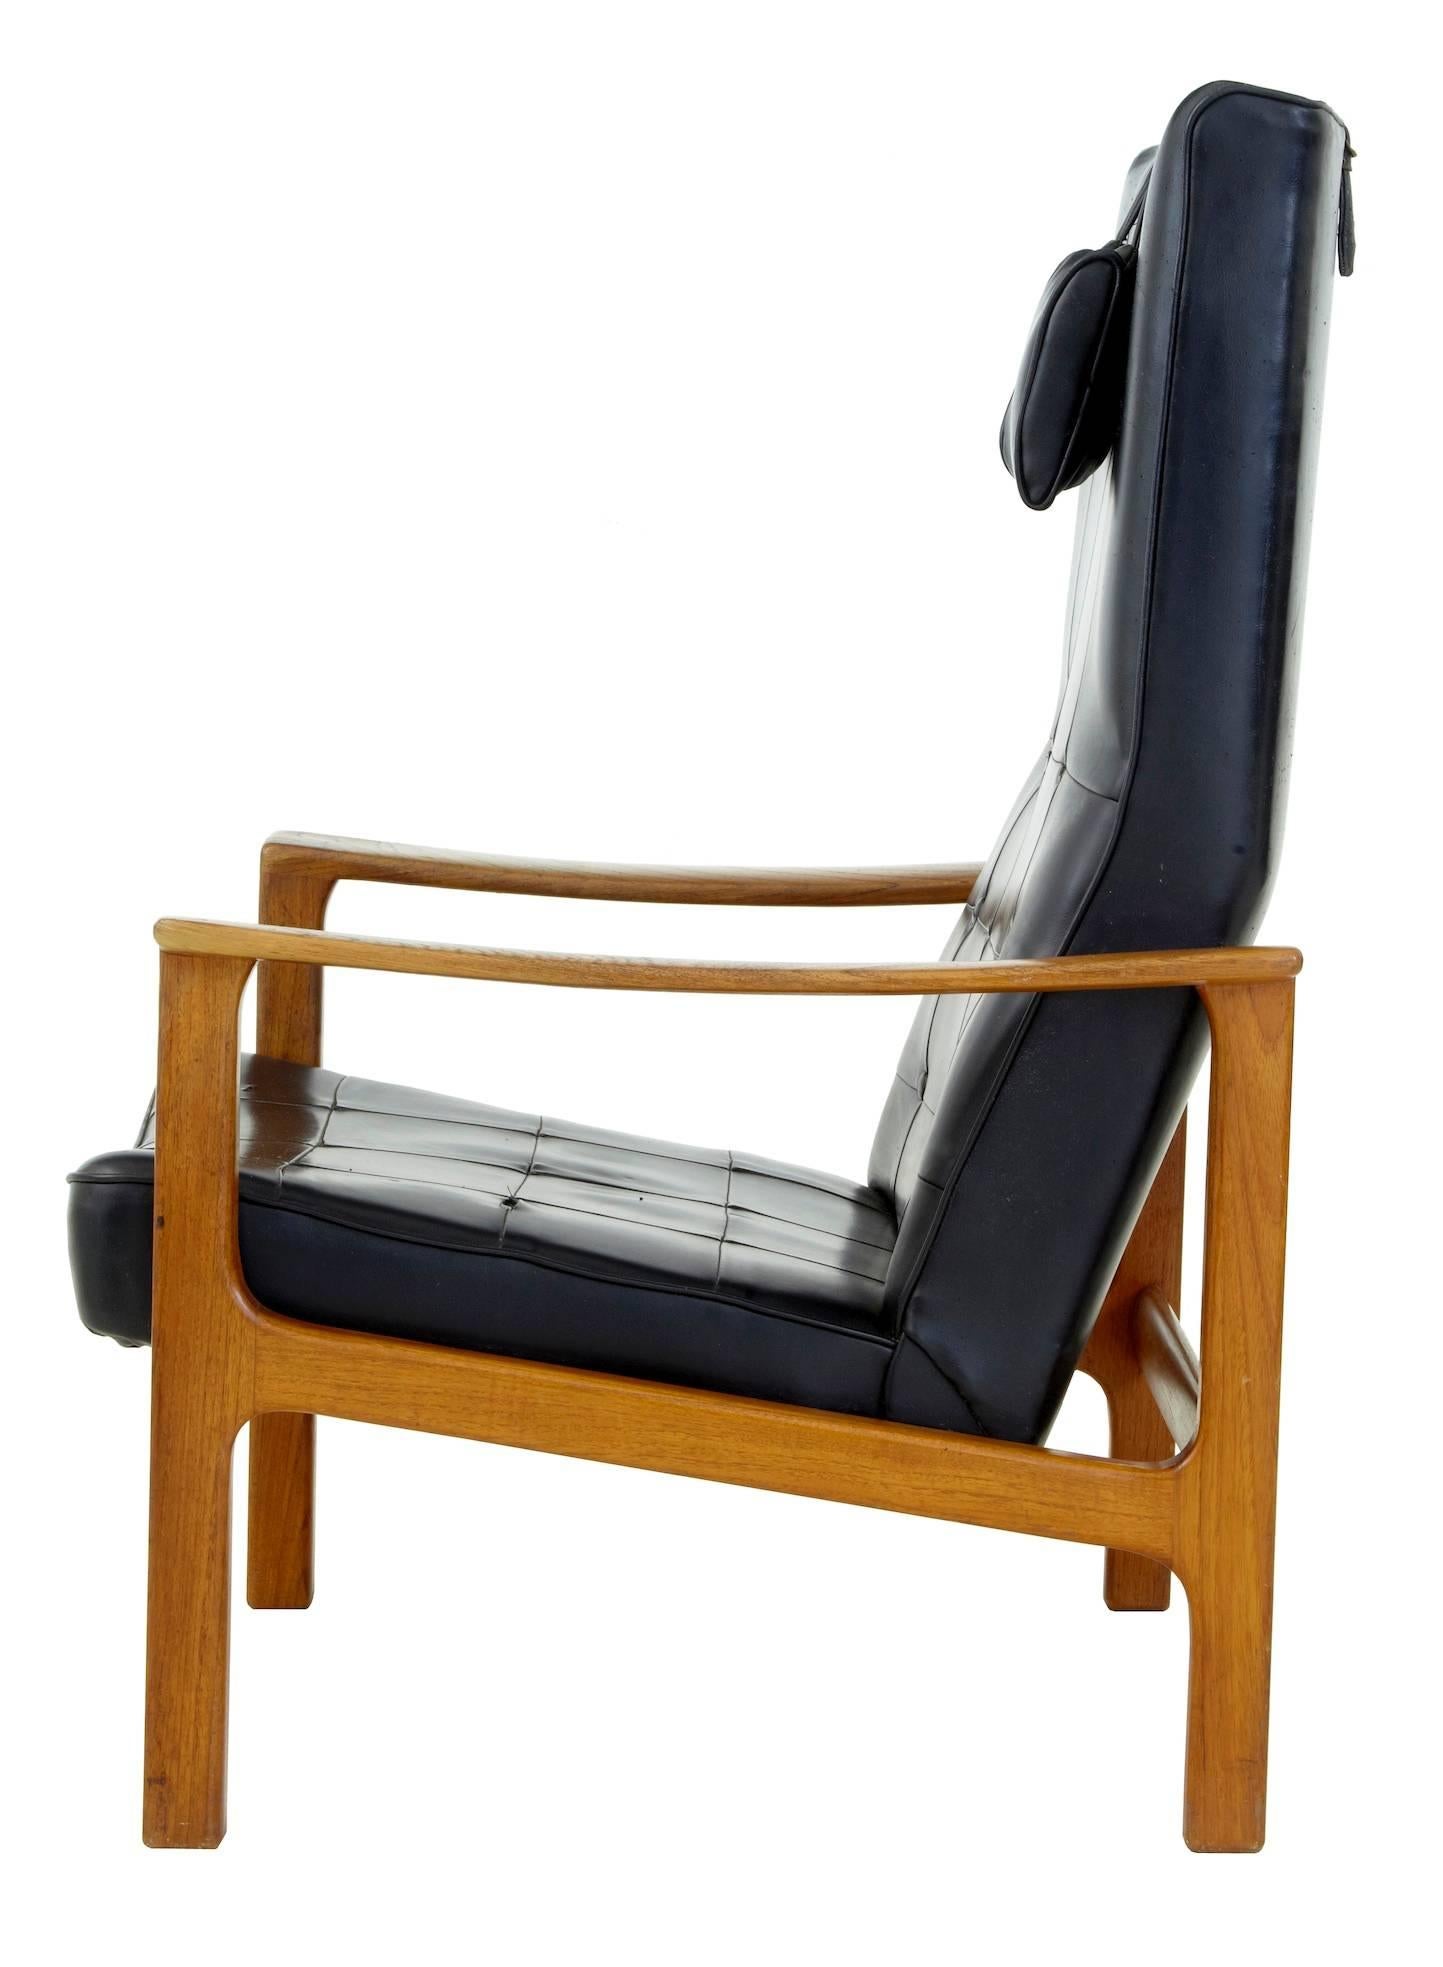 Fine piece of scandinavian design, circa 1960.
Solid teak frame, with reclining capabilities.
Black leather with squared piping.
A few buttons missing to the back.
Some pitting and scratch marks to leather on the seat and top of head